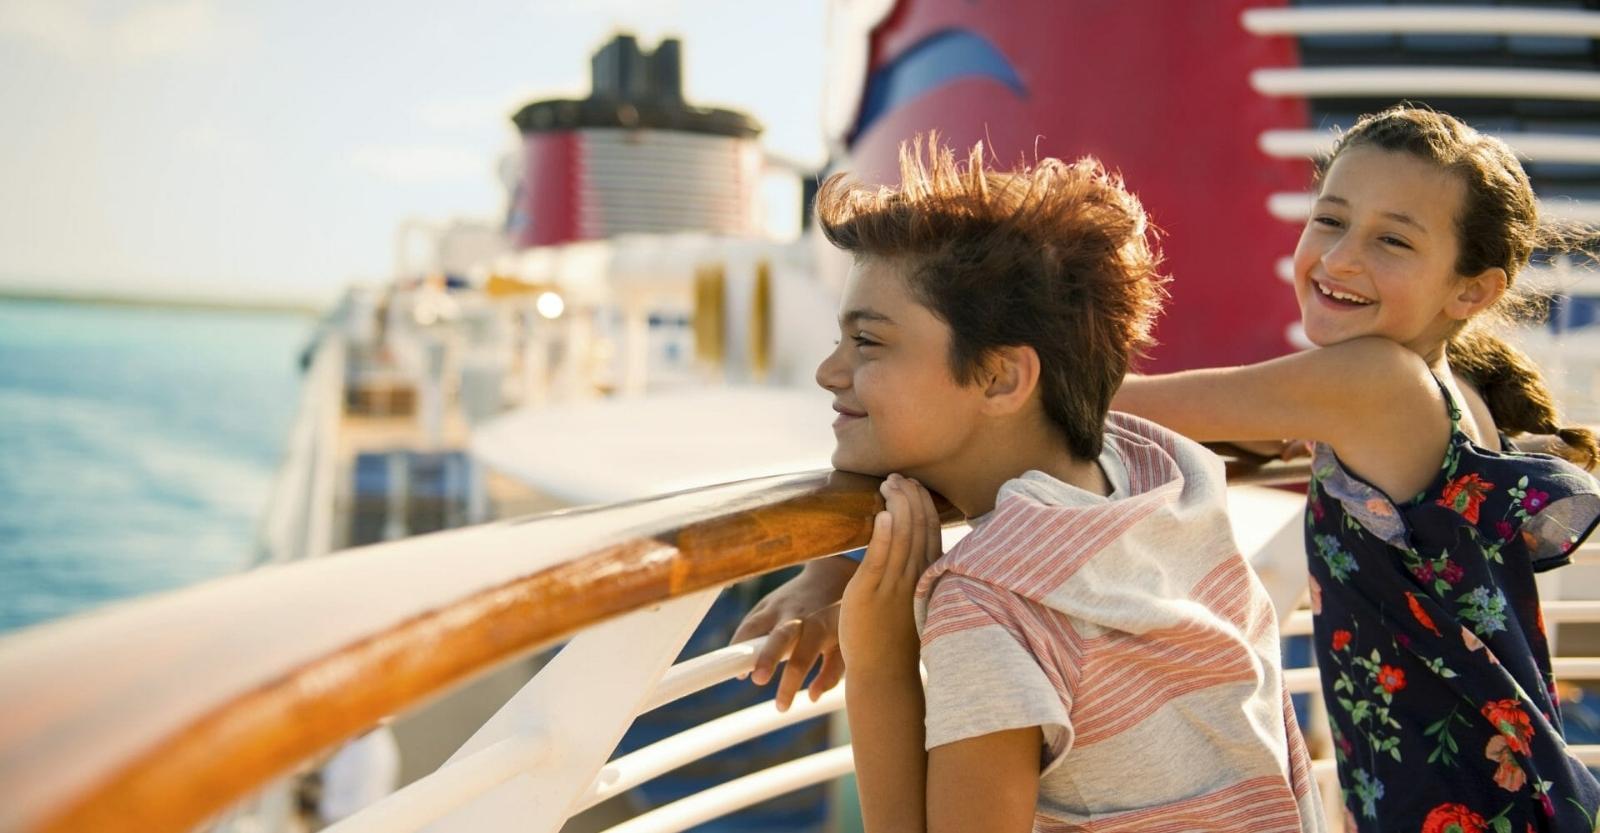 Children looking over the side of a cruise ship